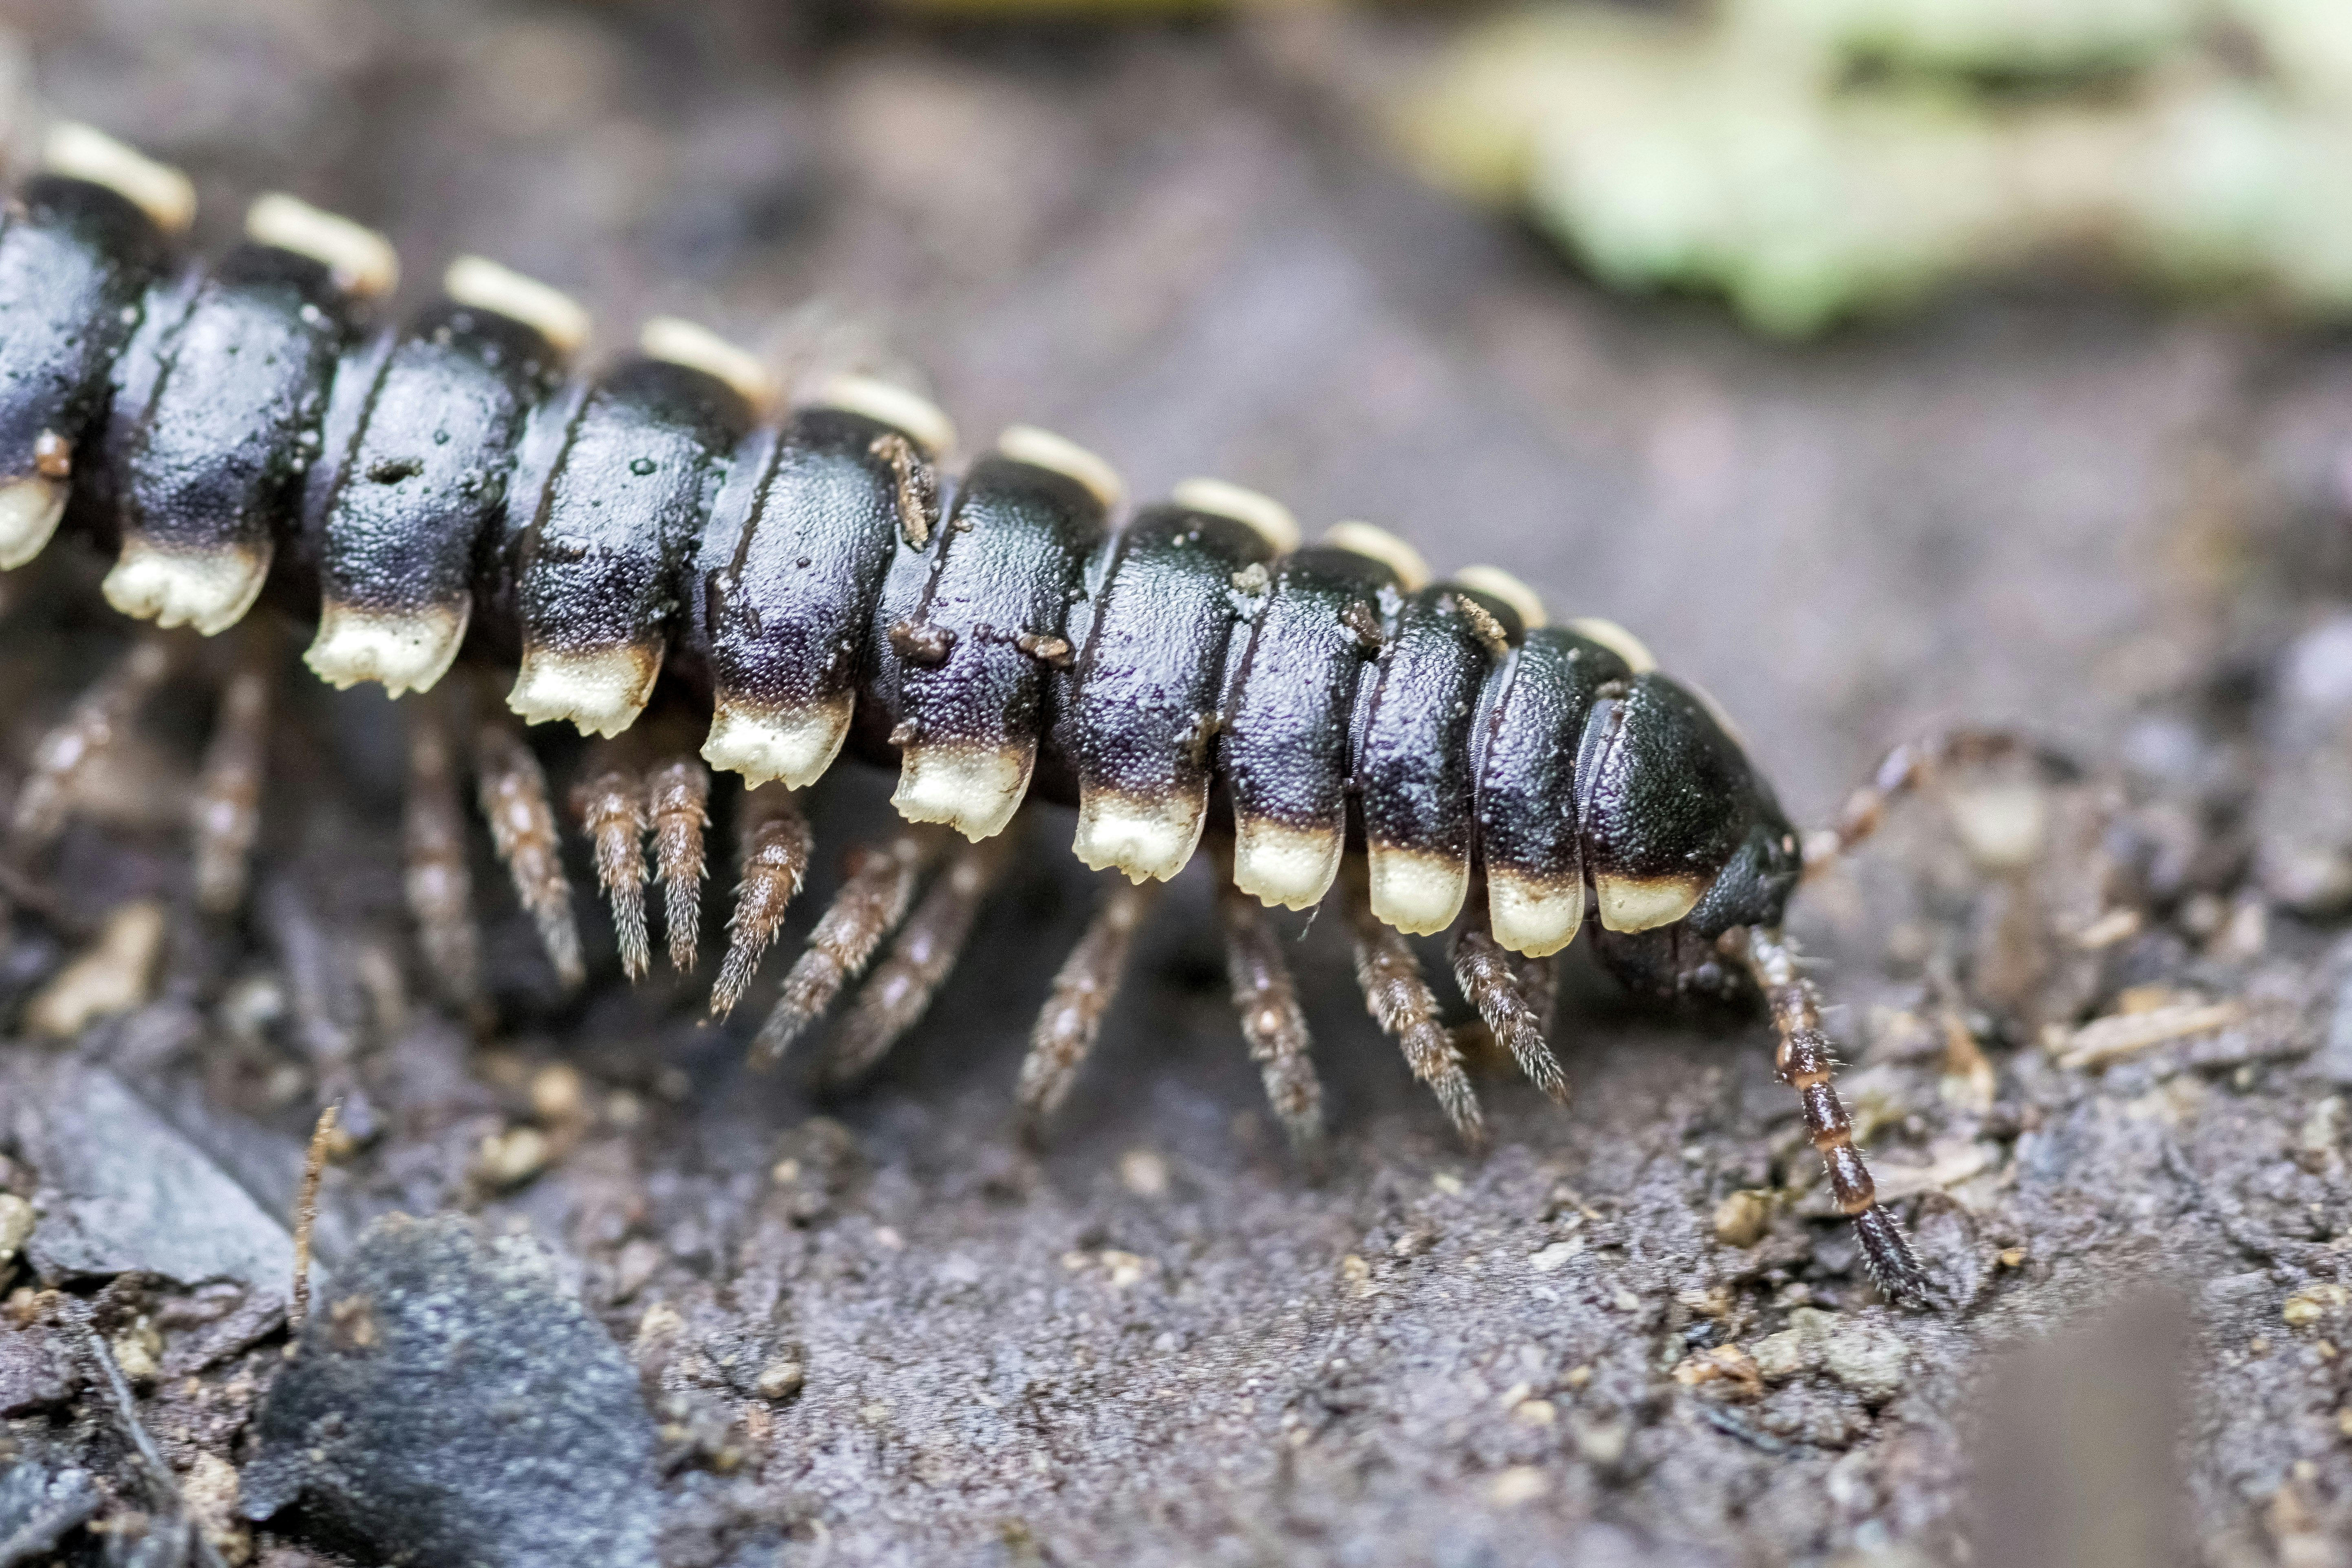 black and brown caterpillar on gray concrete surface